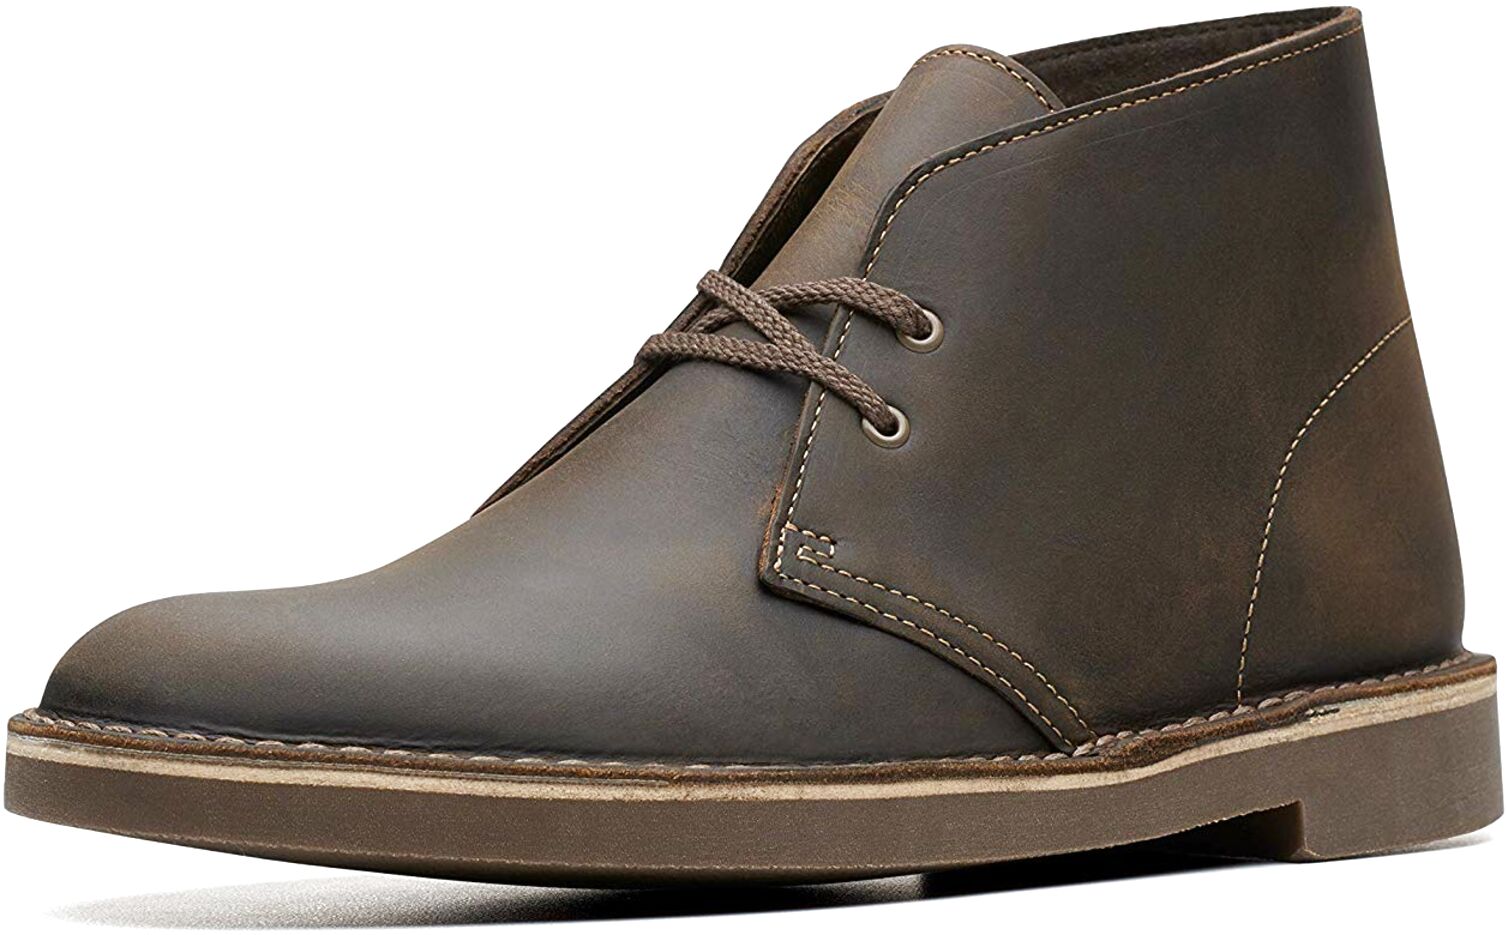 Clarks Shoes Clarks for sale in UK | View 102 bargains